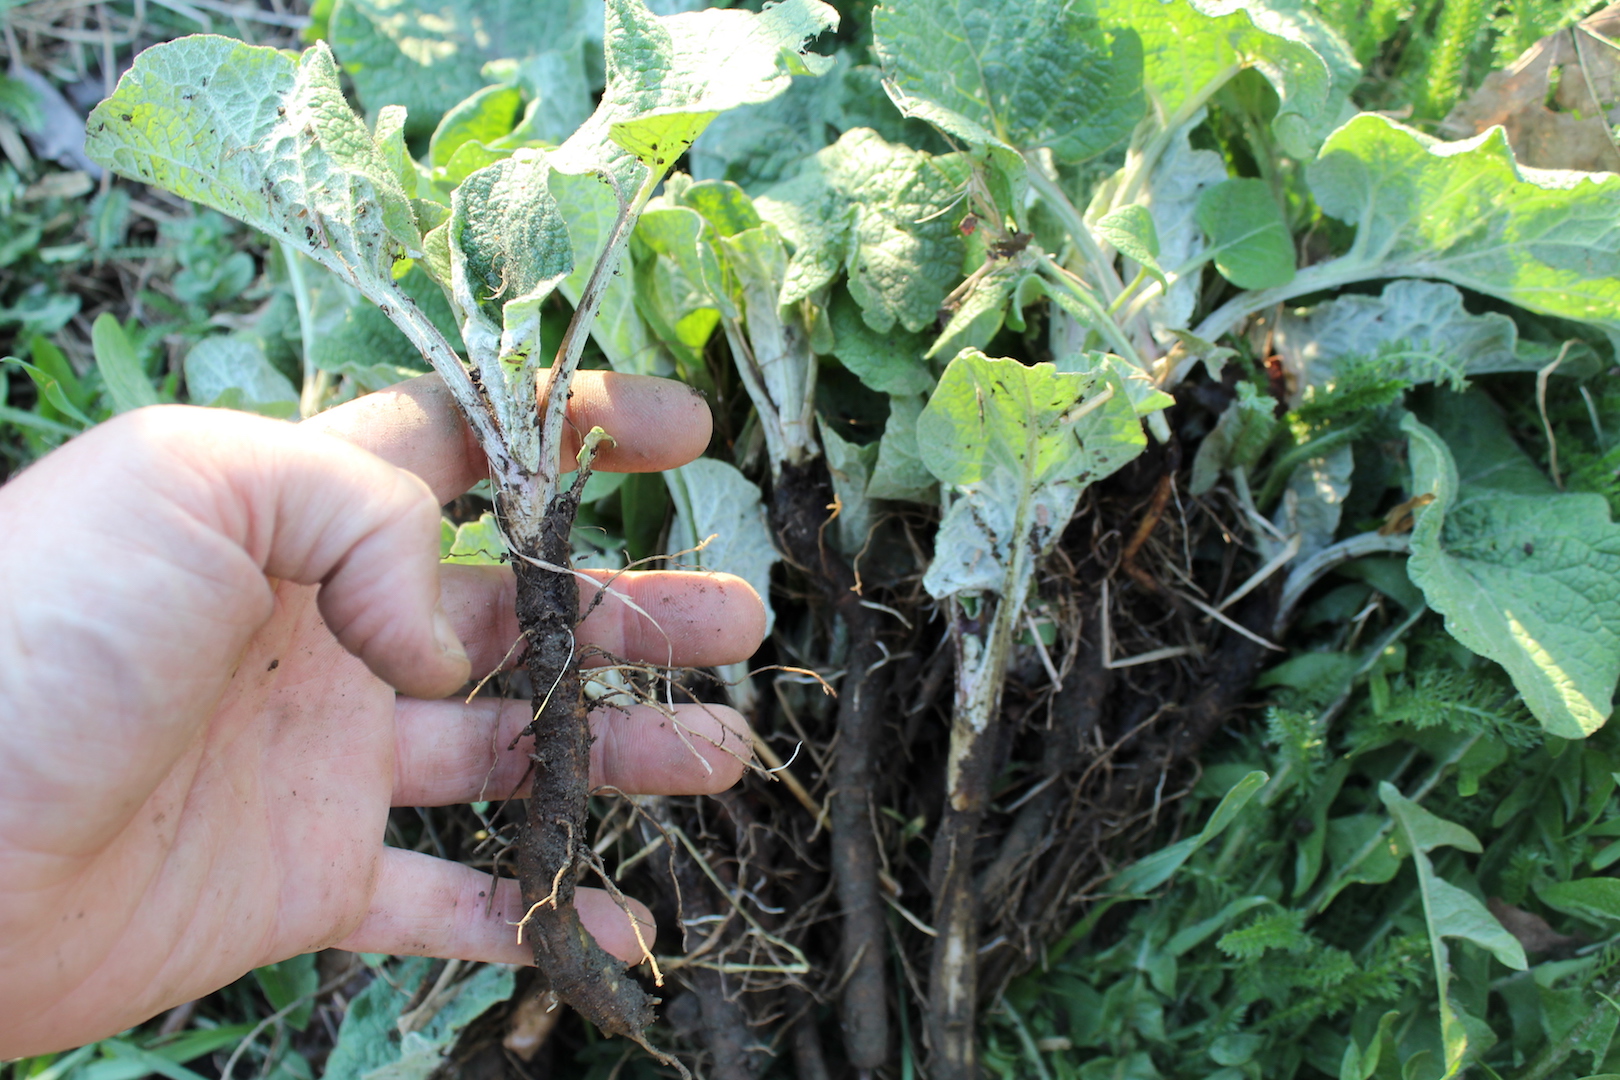 Image of Burdock plant being harvested